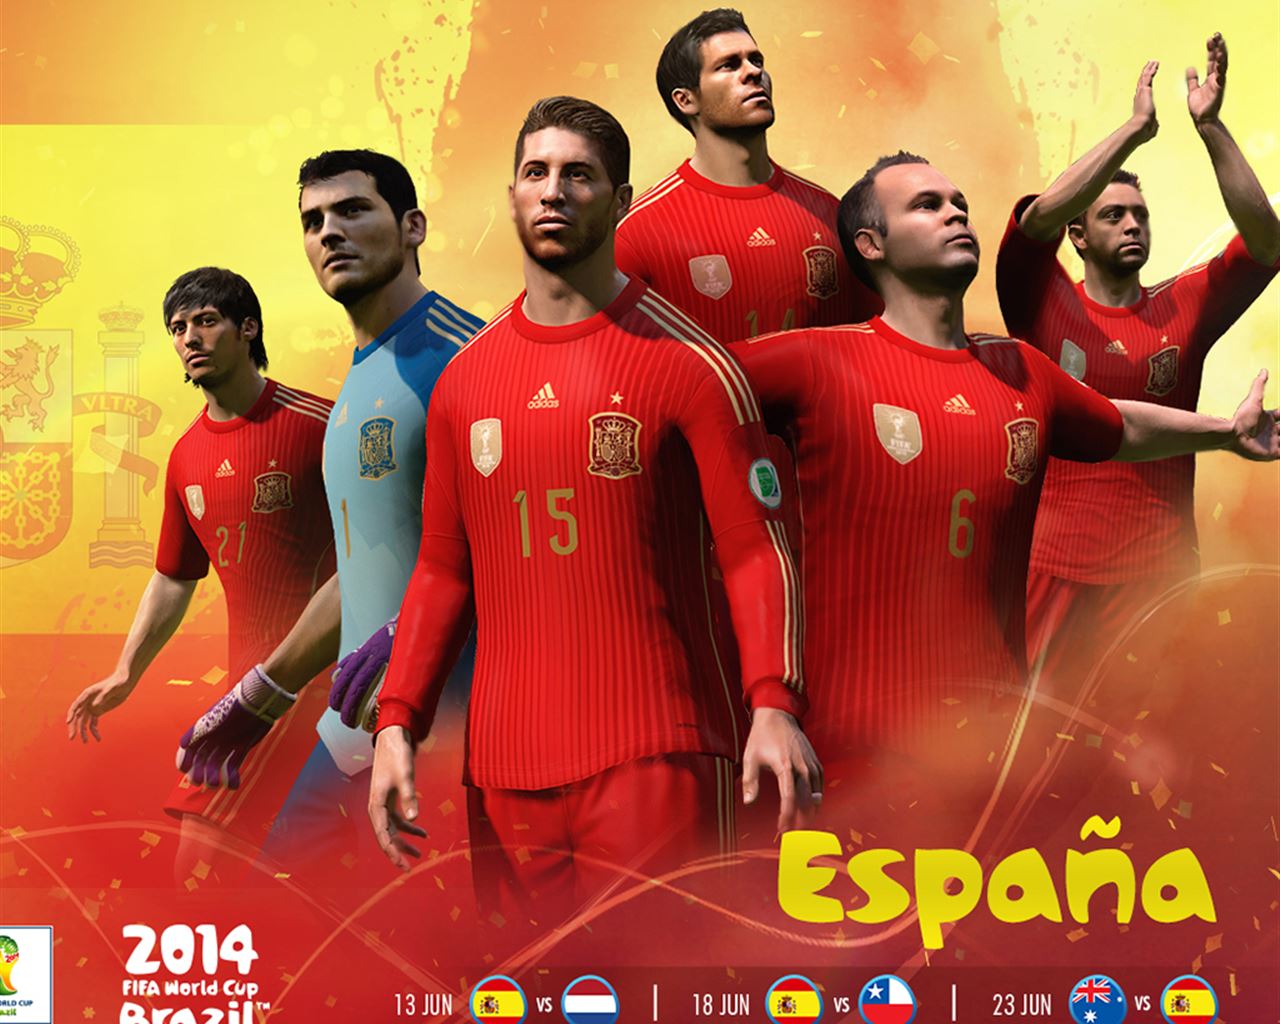 2014 FIFA World Cup Spain Team iPad Wallpapers Free Download